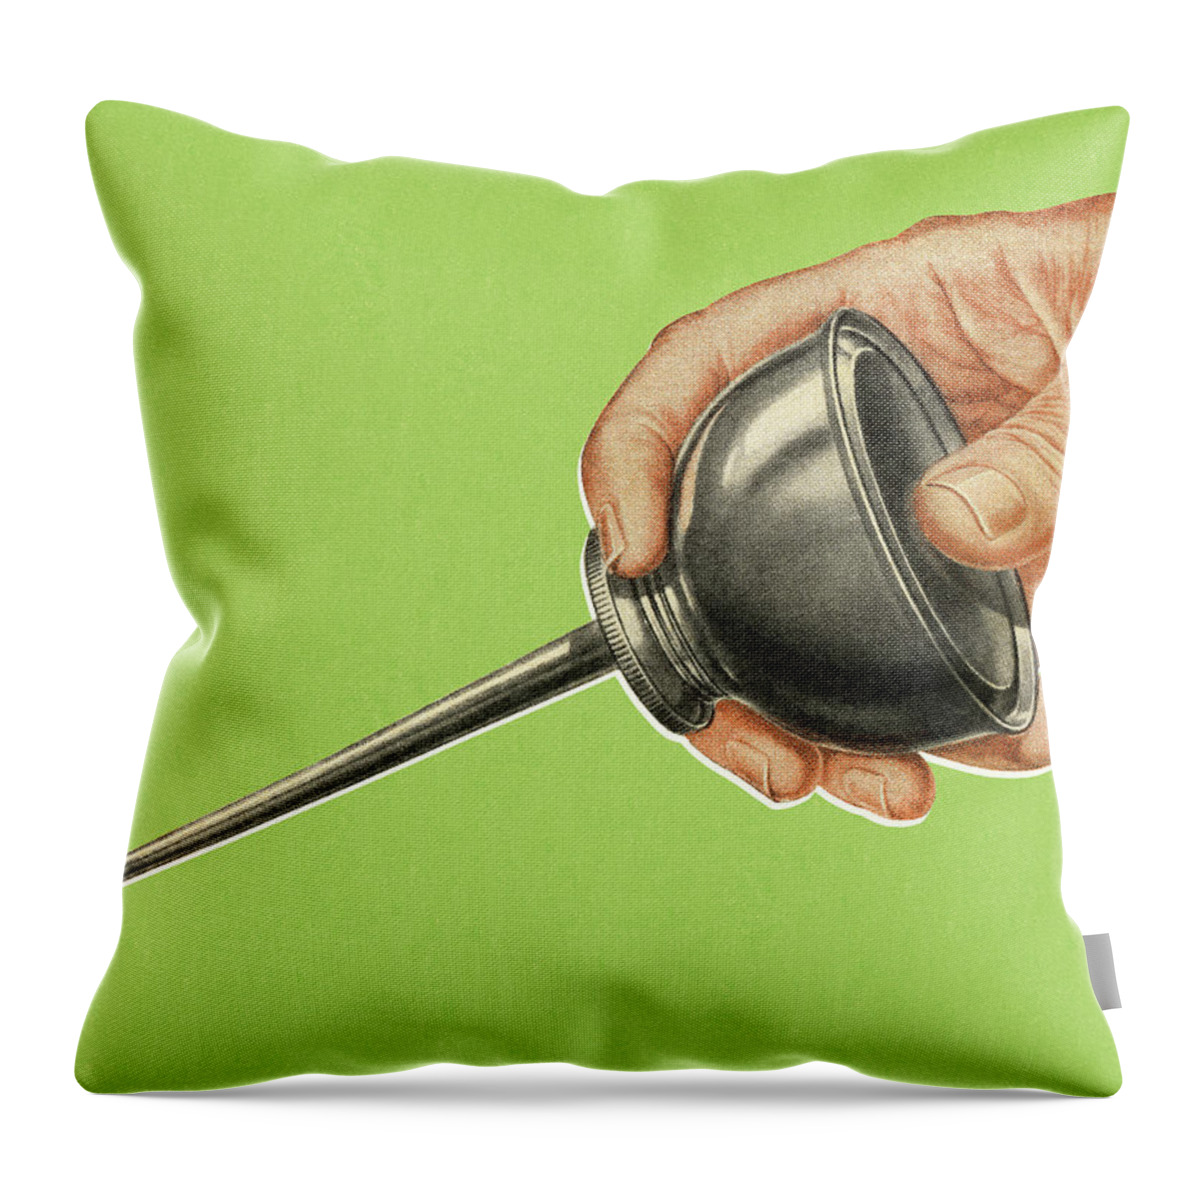 Campy Throw Pillow featuring the drawing Hand Using an Oil Can by CSA Images